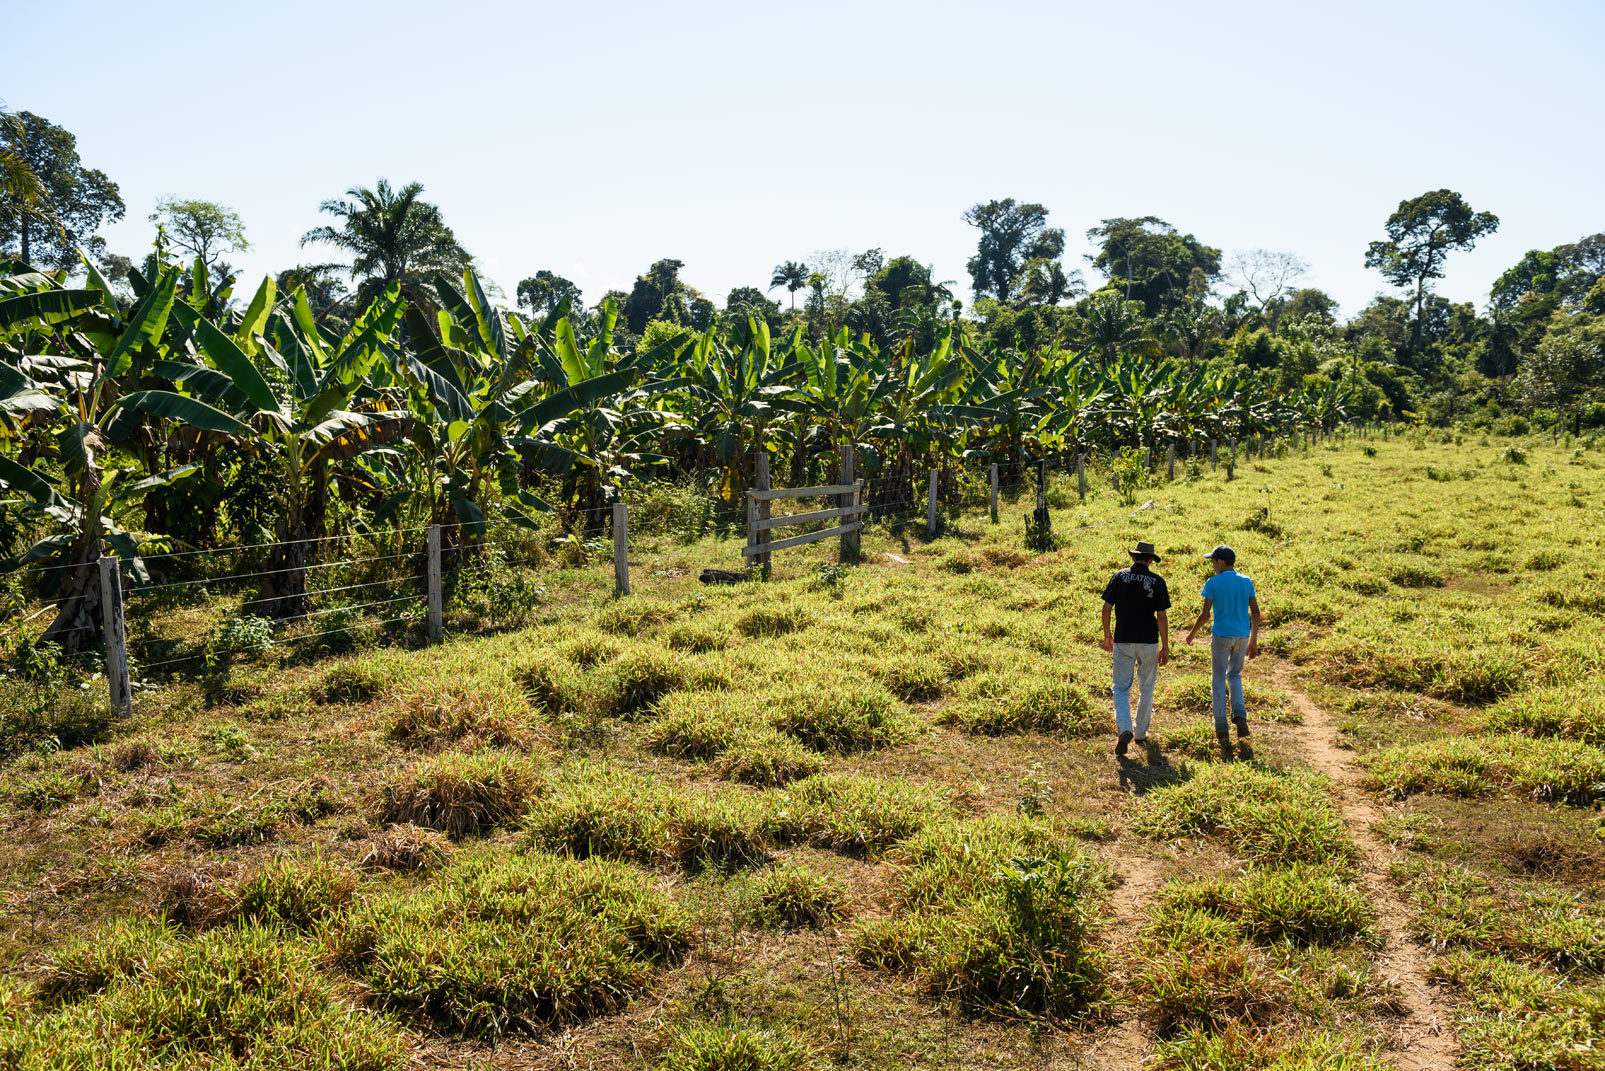 Deniston Mariano Dutra and Matheus Correia Dutra walk along a reforested area in São Félix do Xingu. The Nature Conservancy is working with this family and other farmers on increasing food production while reversing habitat loss. Photo © Kevin Arnold